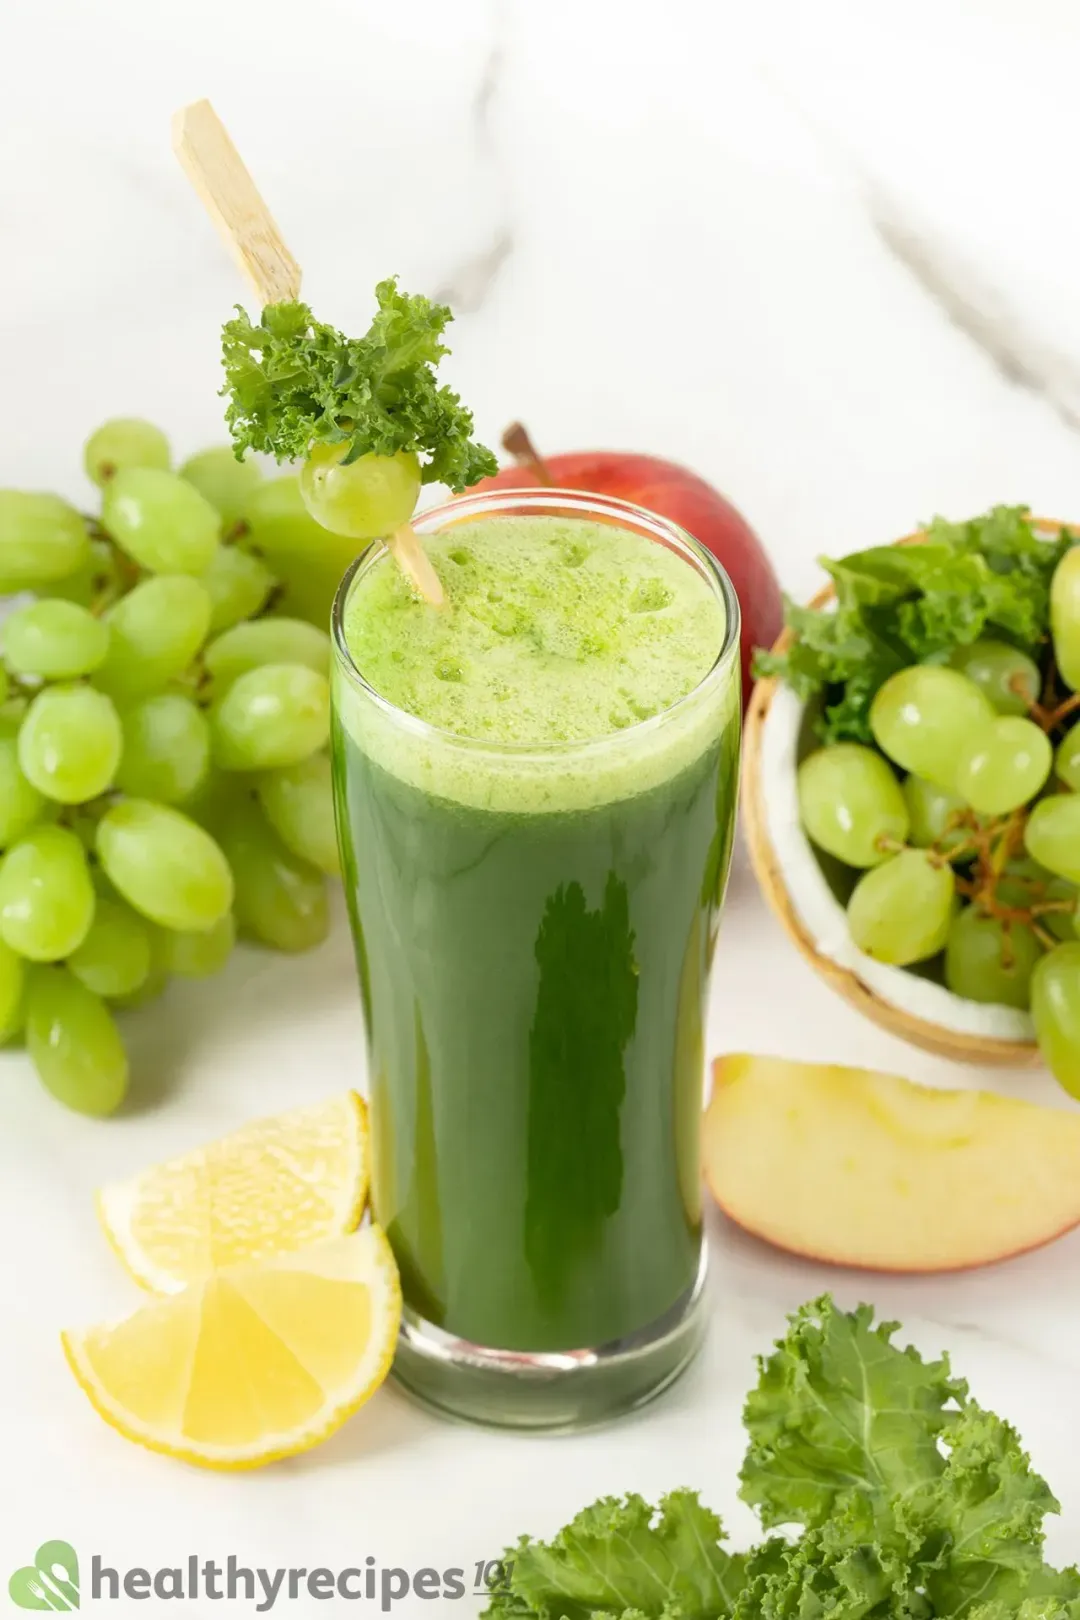 A picture of a glass of green machine juice surrounded by some lemon wedges, grapes, and kale that are taken from above